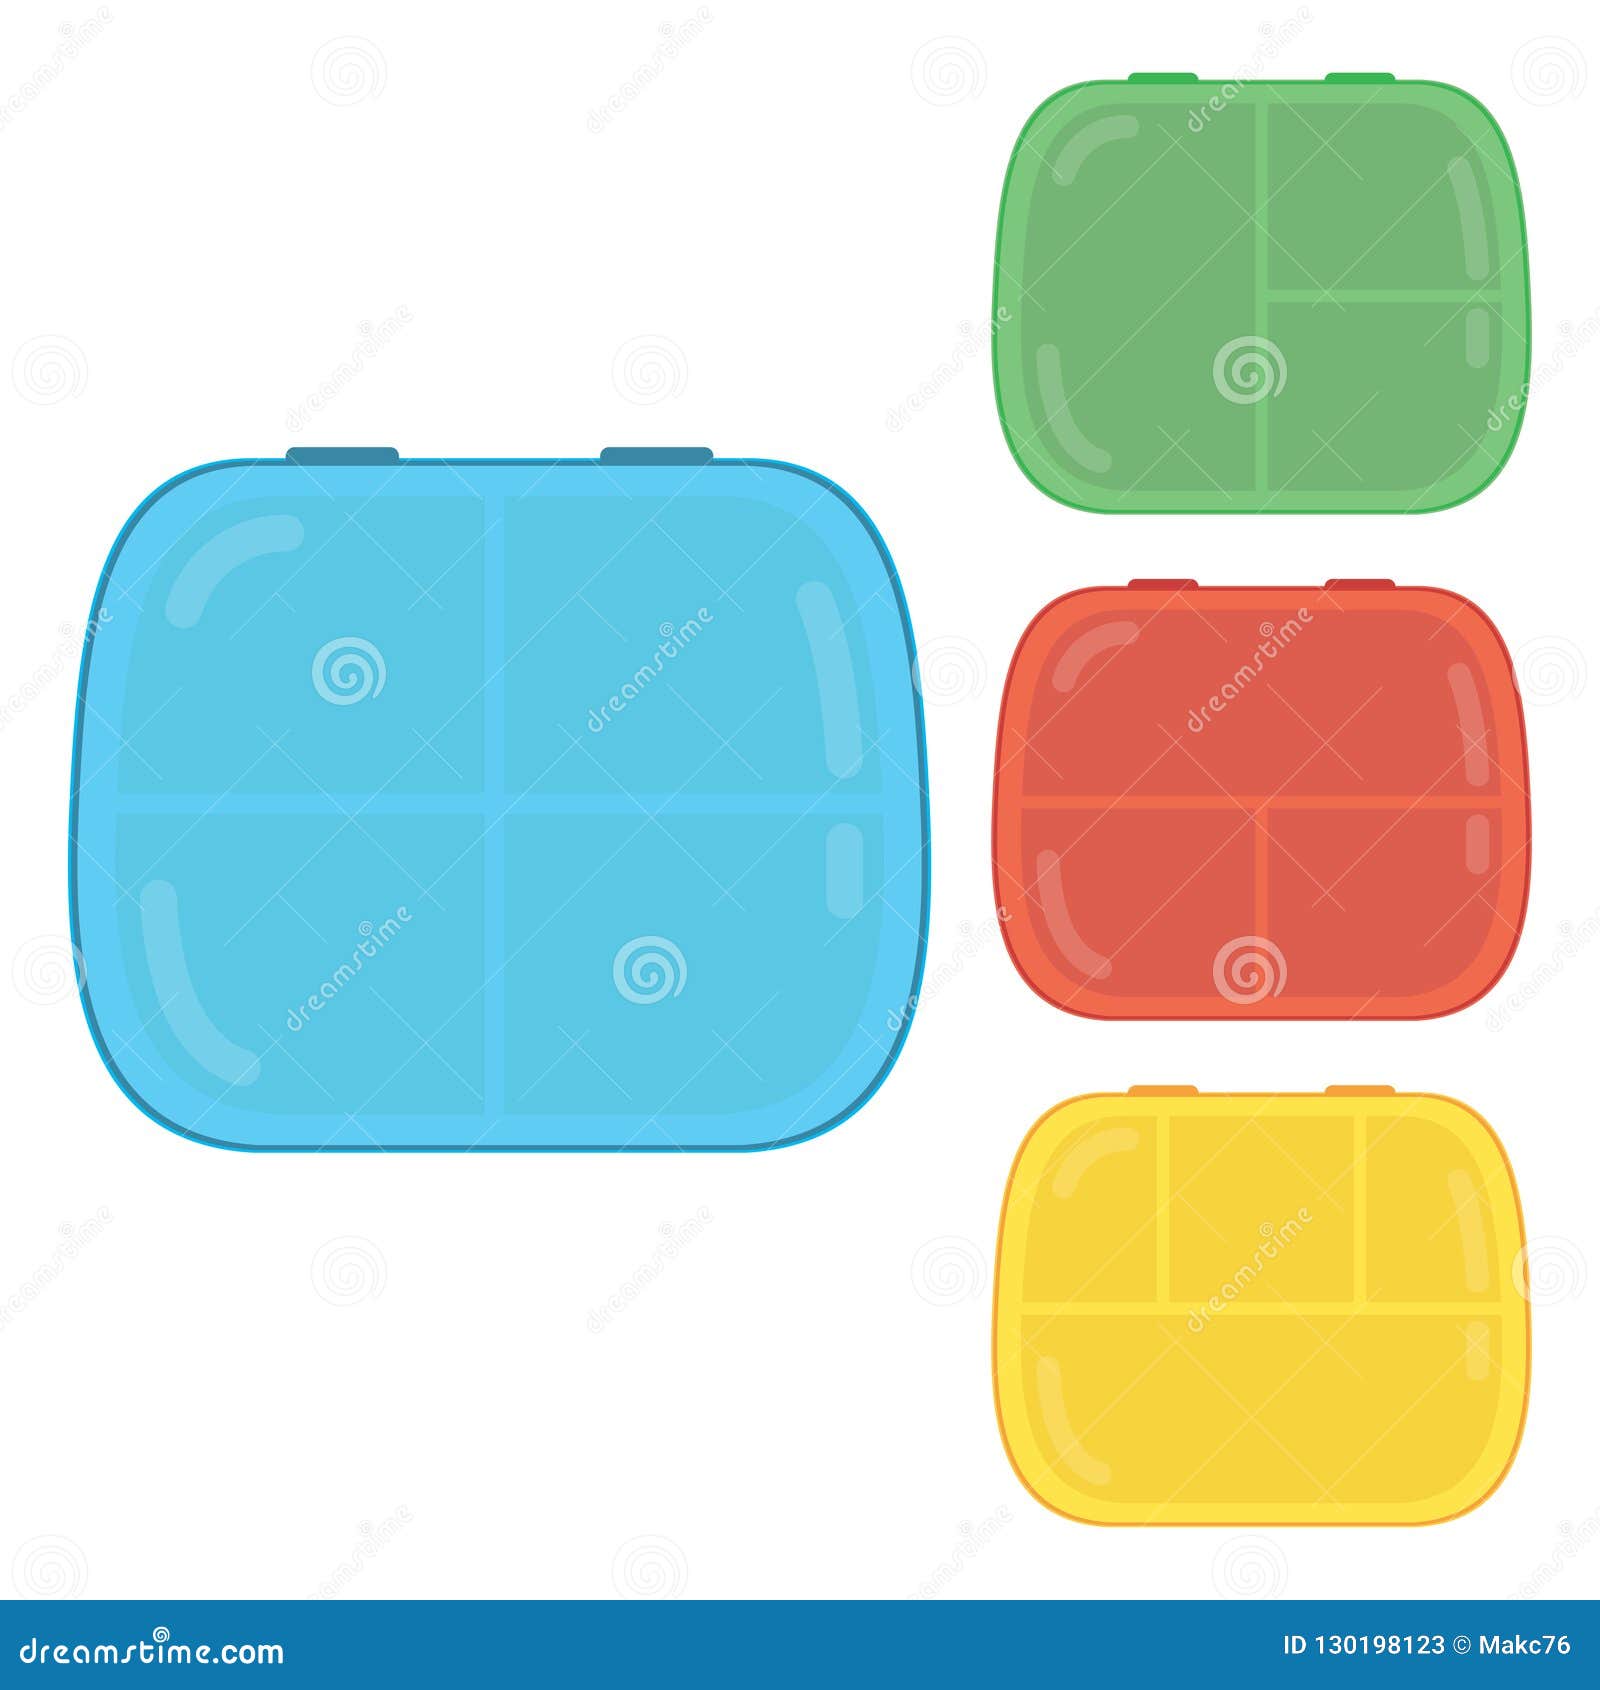 Download Yellow Lunchbox Stock Illustrations 42 Yellow Lunchbox Stock Illustrations Vectors Clipart Dreamstime Yellowimages Mockups